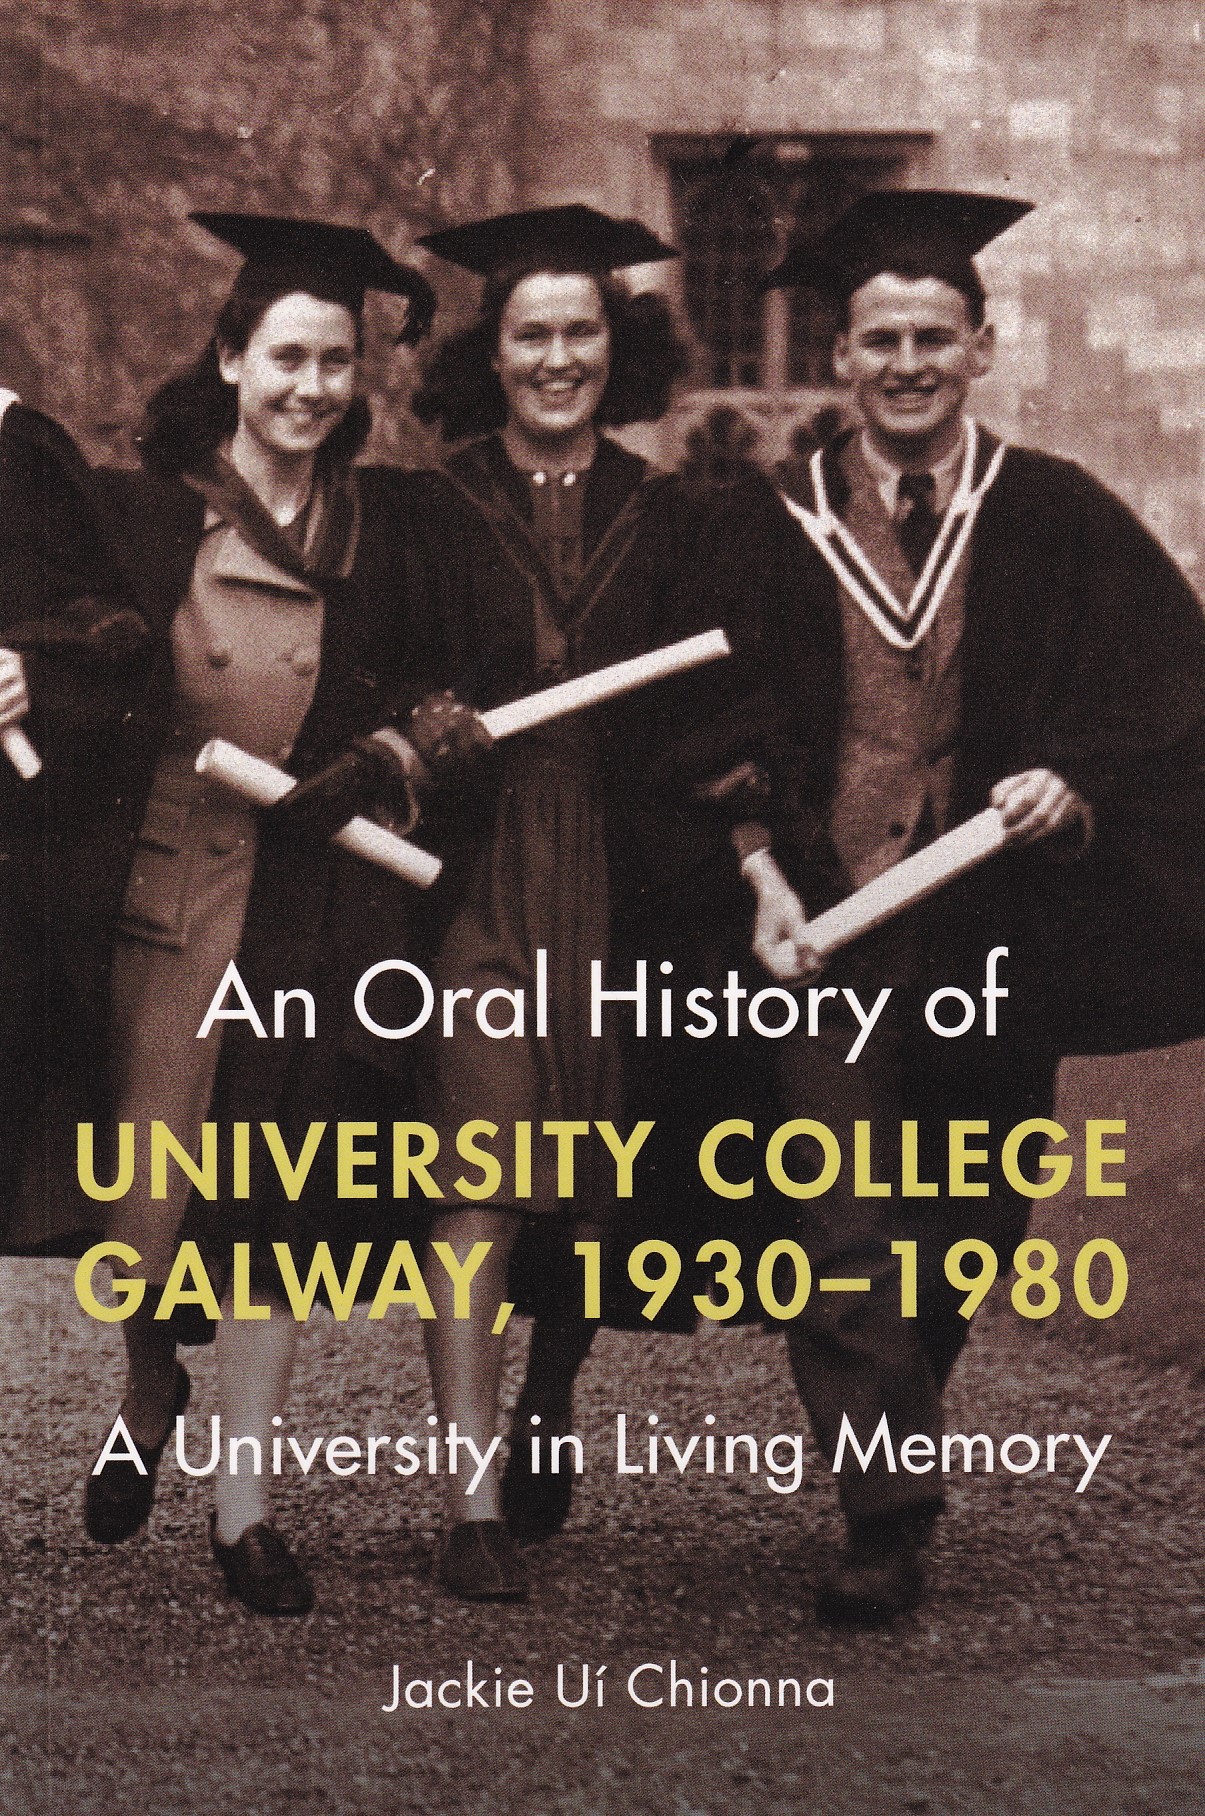 An Oral History of University College Galway, 1930-80: A University in Living Memory | Jackie Uí Chionna | Charlie Byrne's